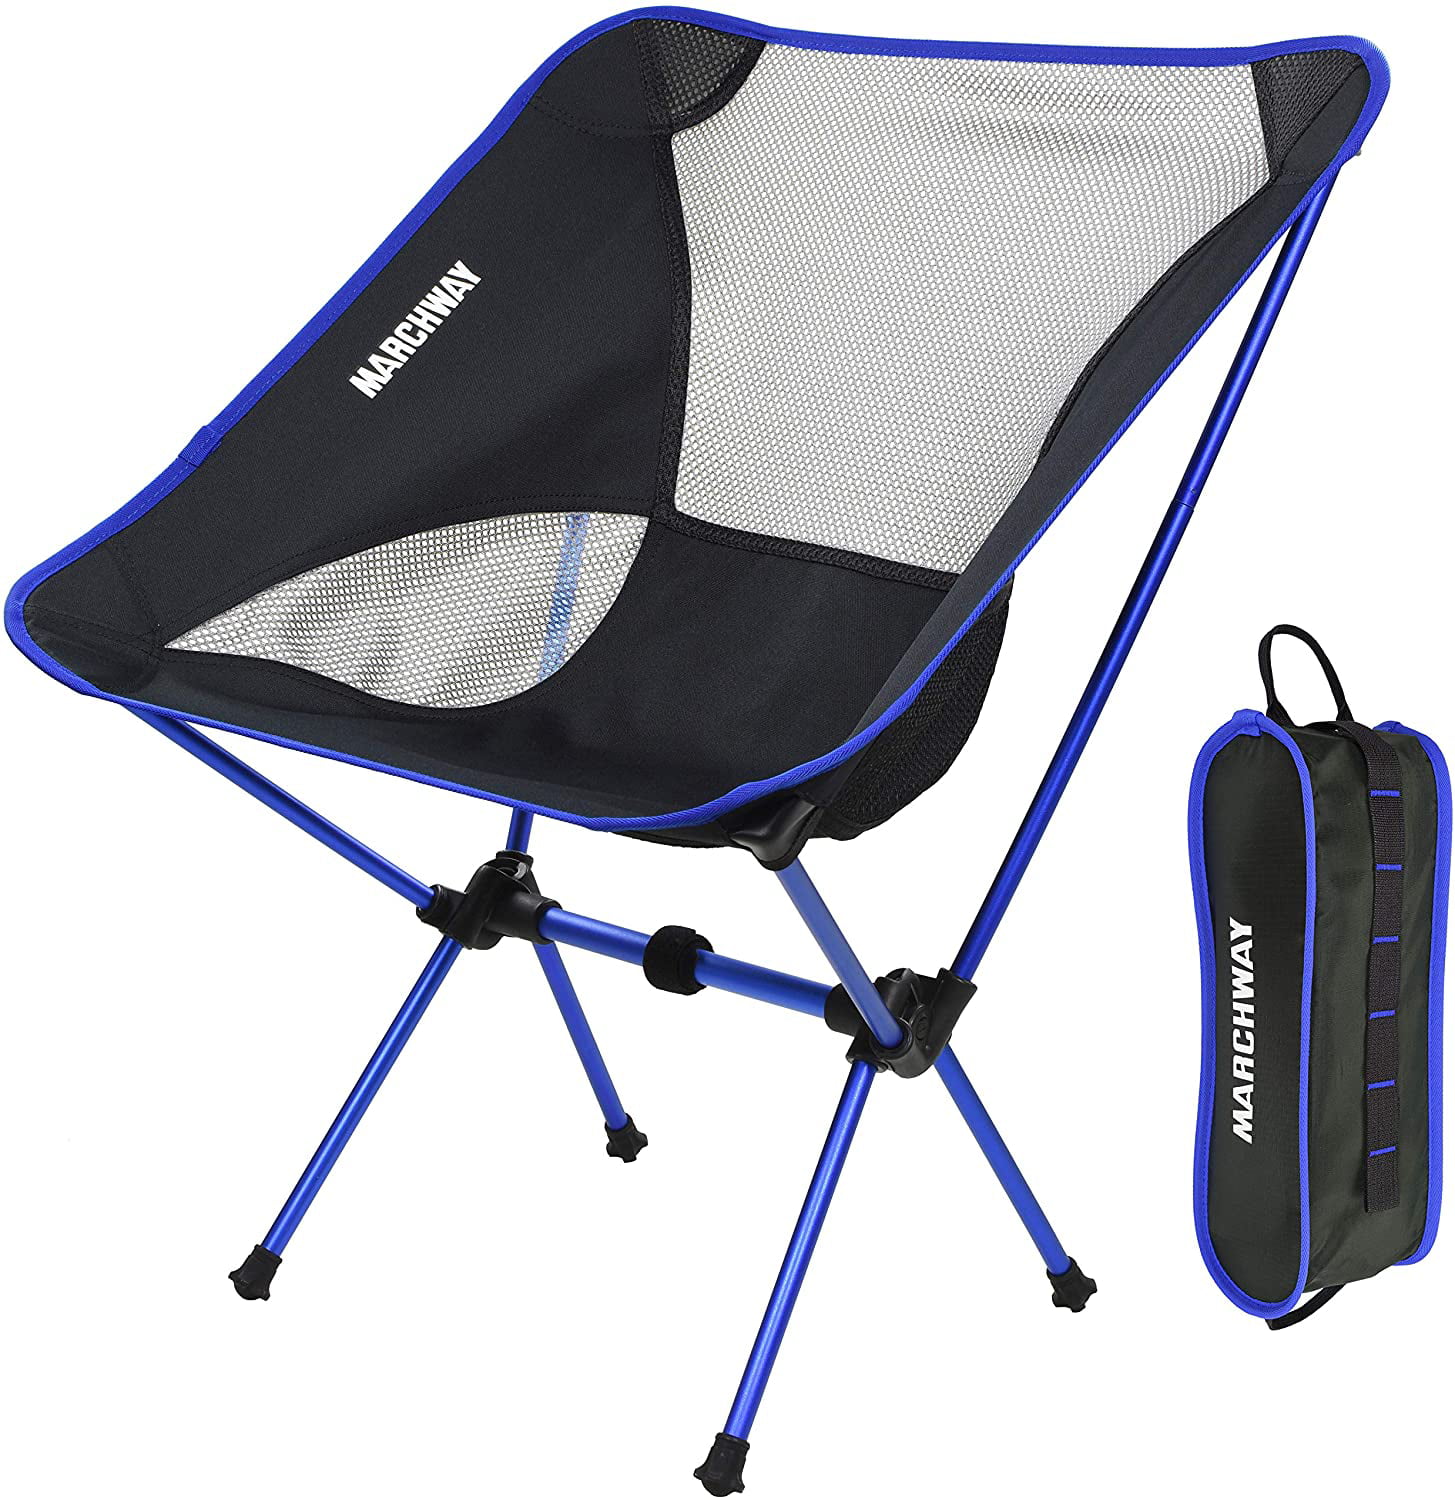 DecorX Ultralight Folding Camping Chair, Portable Compact for Outdoor Camp, Travel, Beach